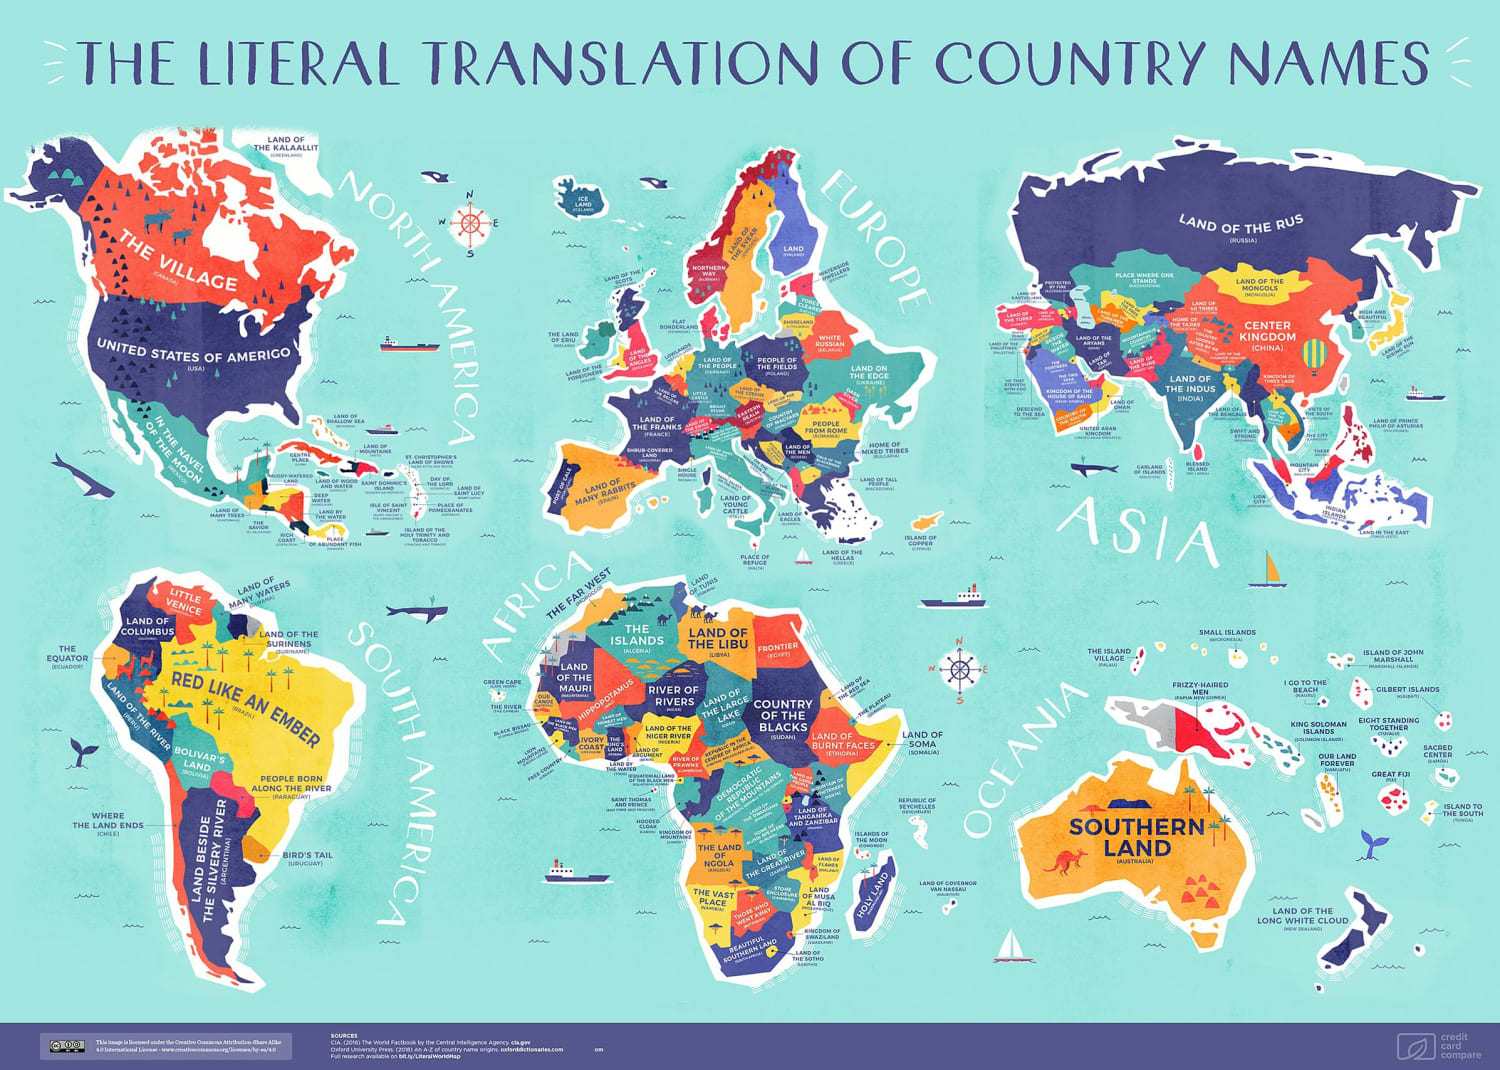 Literal Translation of Country Names